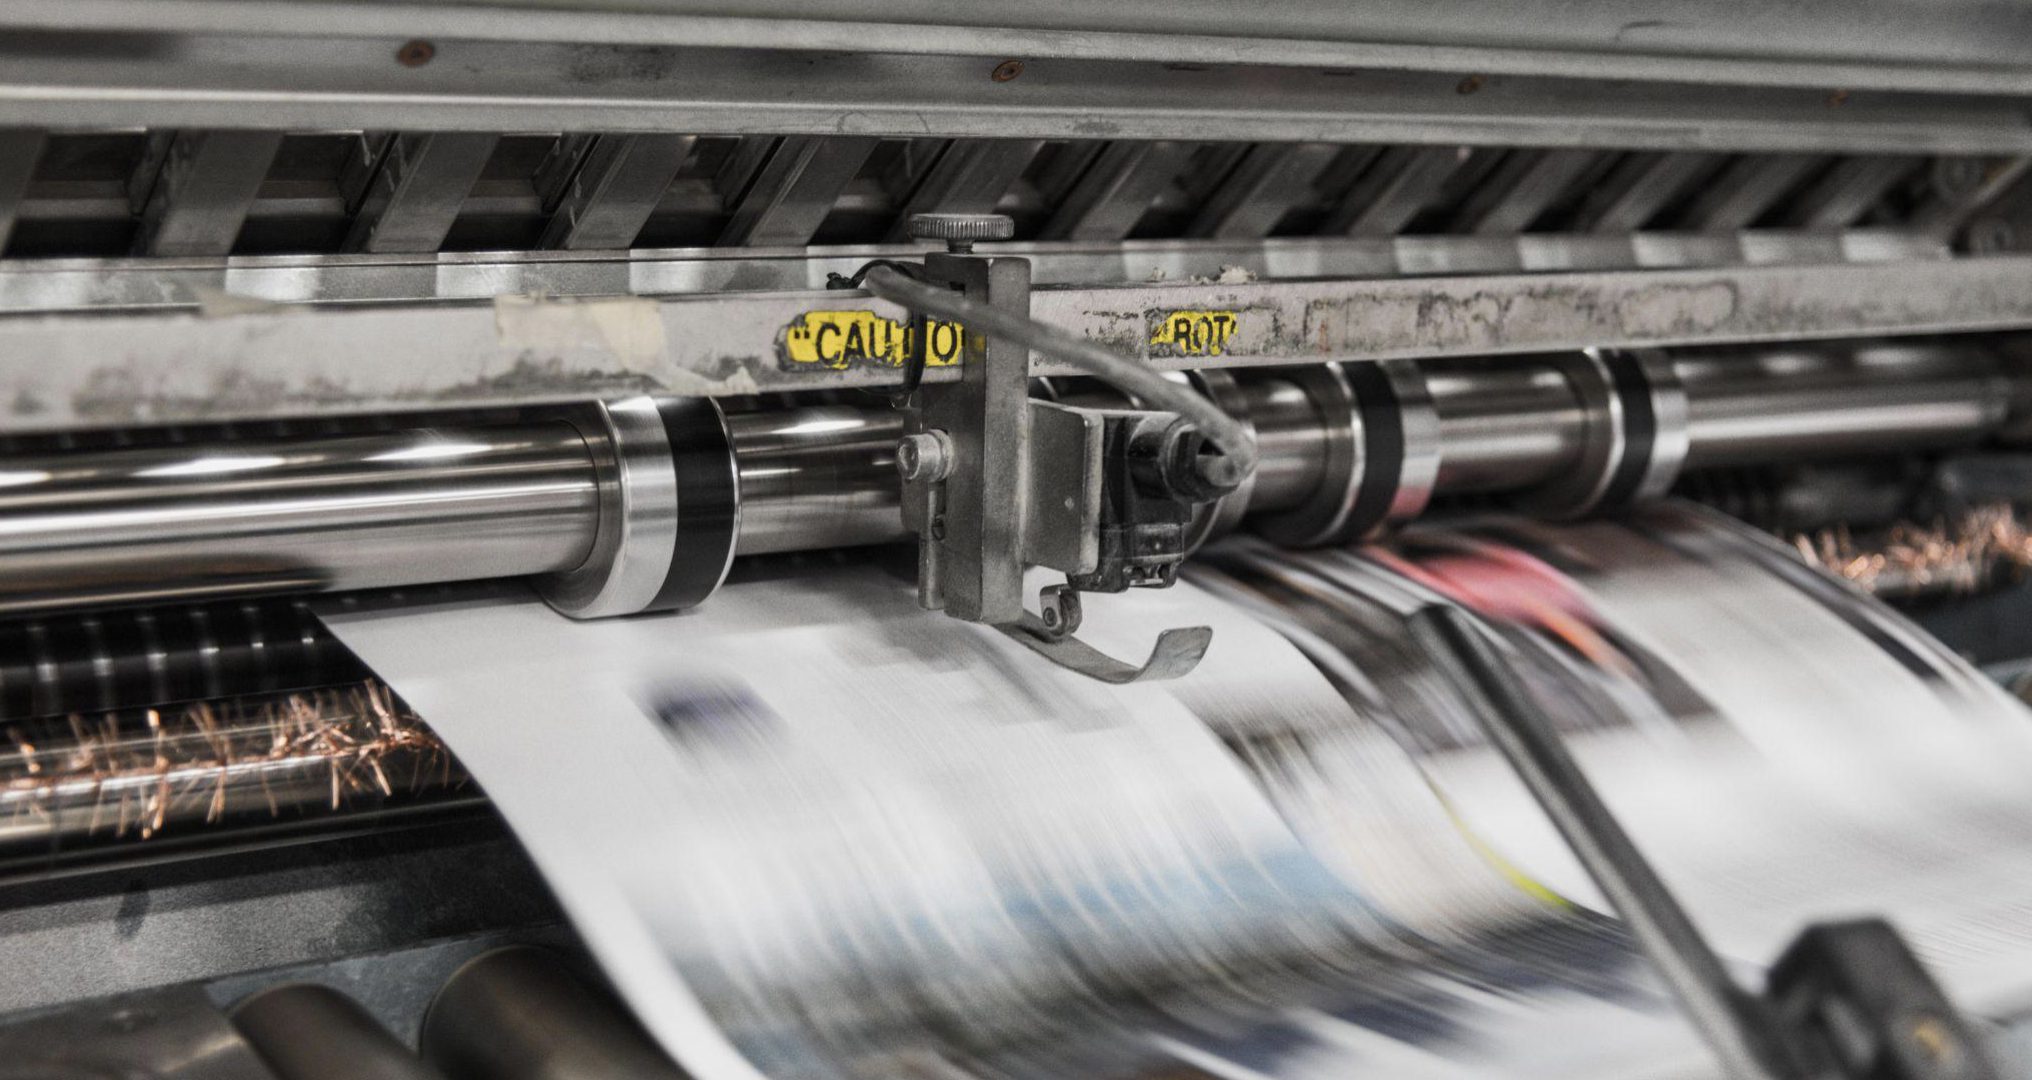 Where Does Print Marketing Fall in a Marketing Strategy